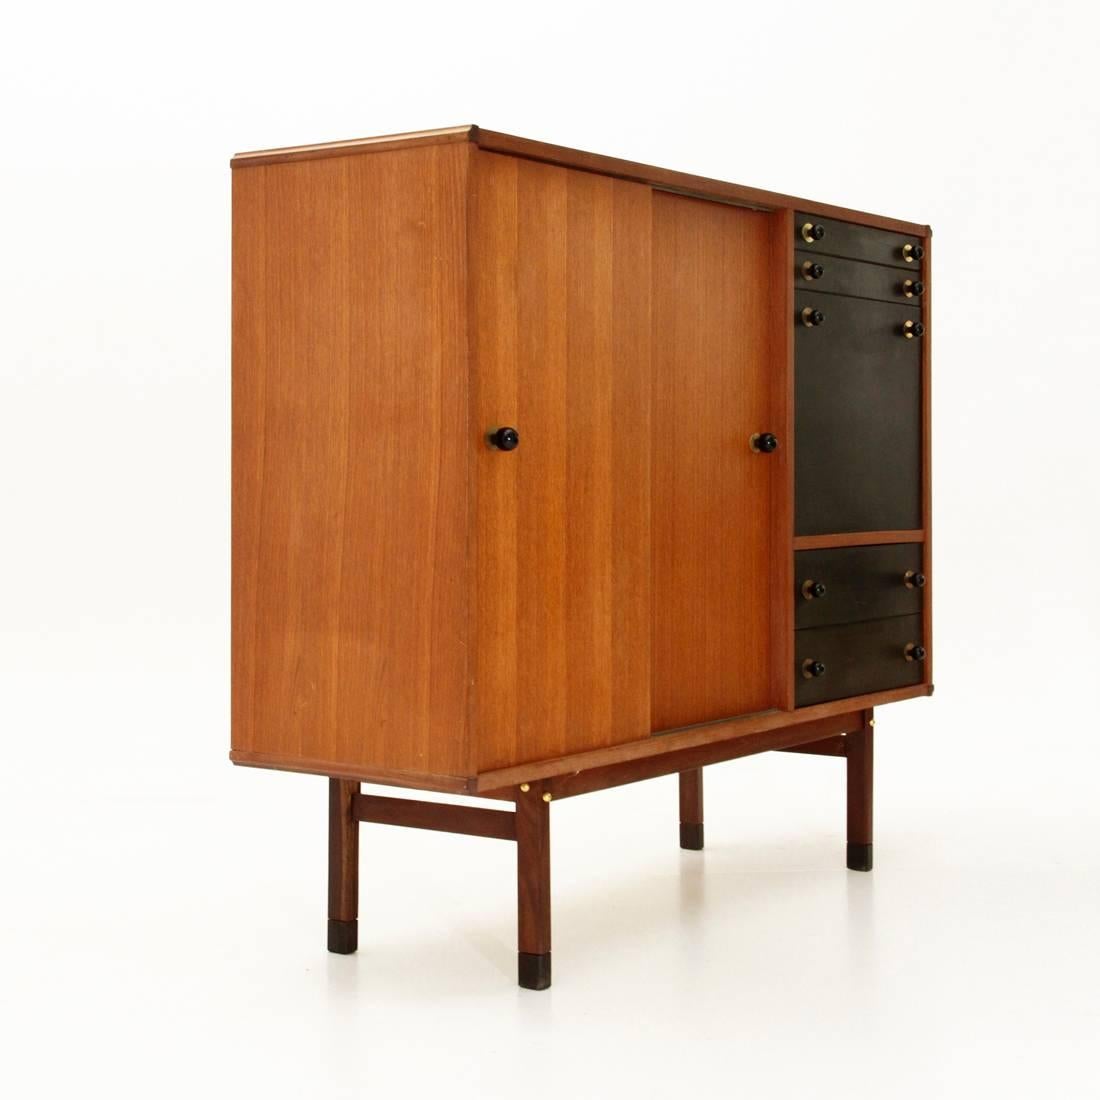 Mid-20th Century Italian Highboard with Wood and Brass Knobs